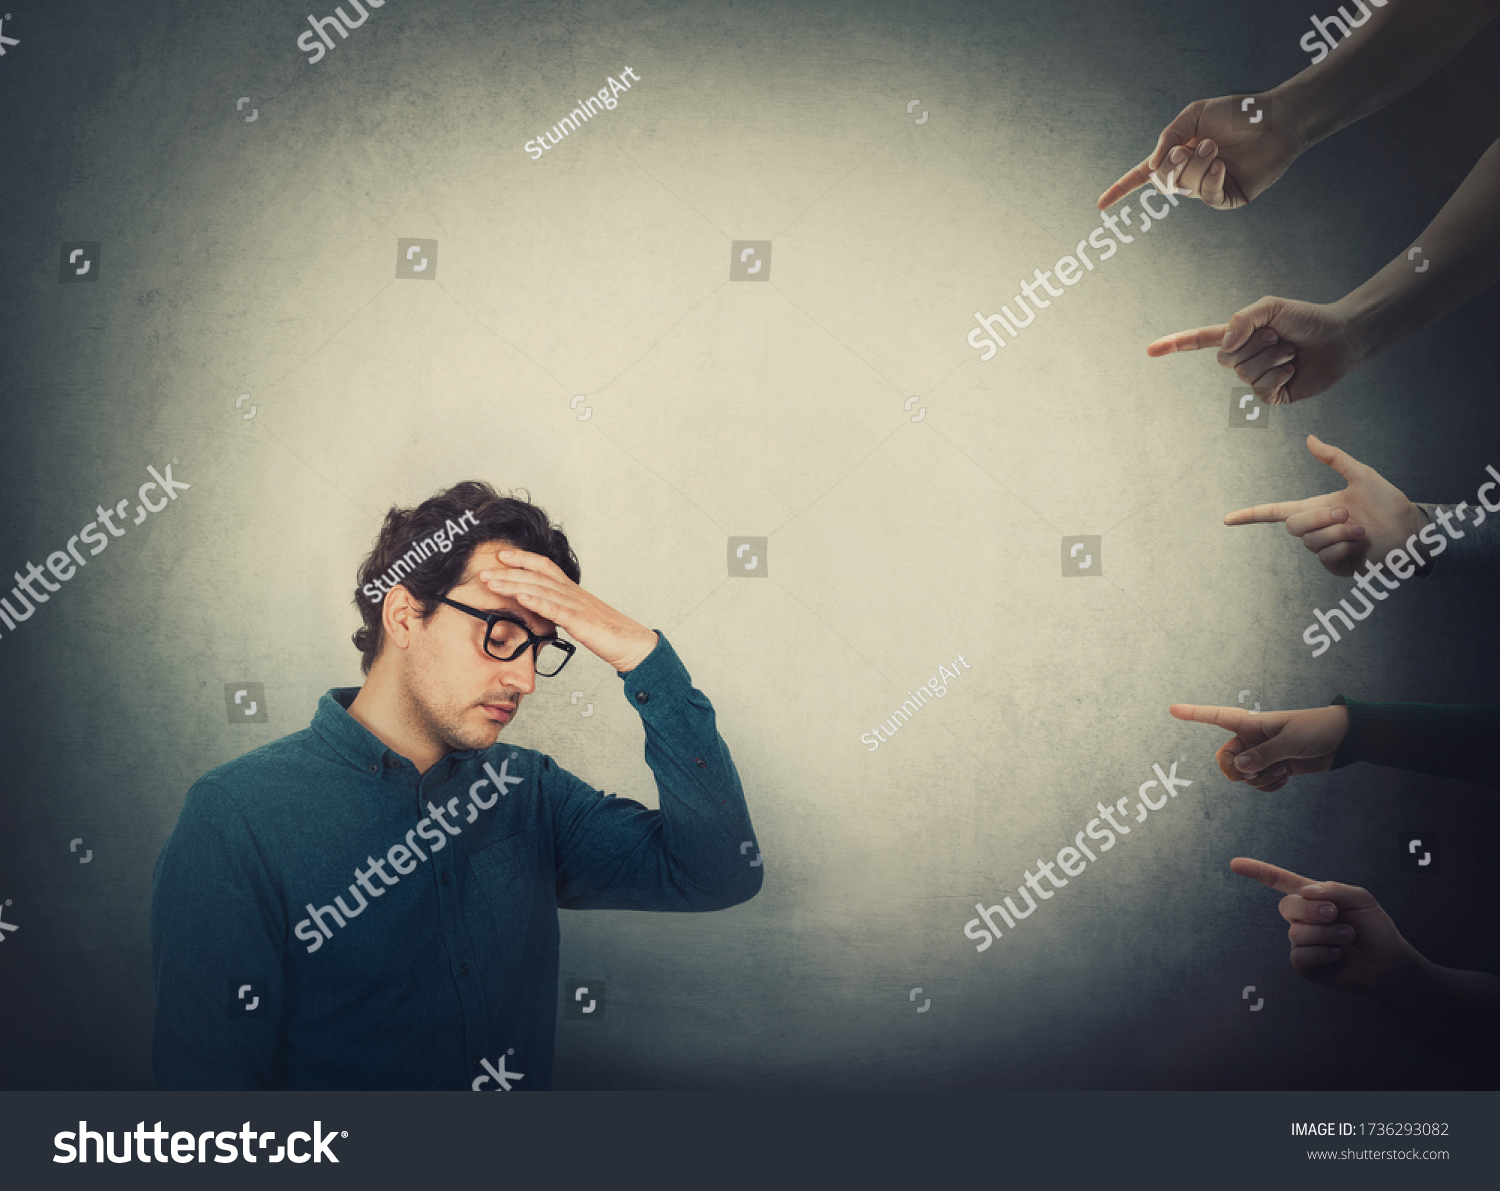 Exhausted businessman suffers dizziness, feels discomfort as multiple people hands pointing to him blaming as guilty. High tension and pressure, depression and emotional stress. Social victim concept. #1736293082